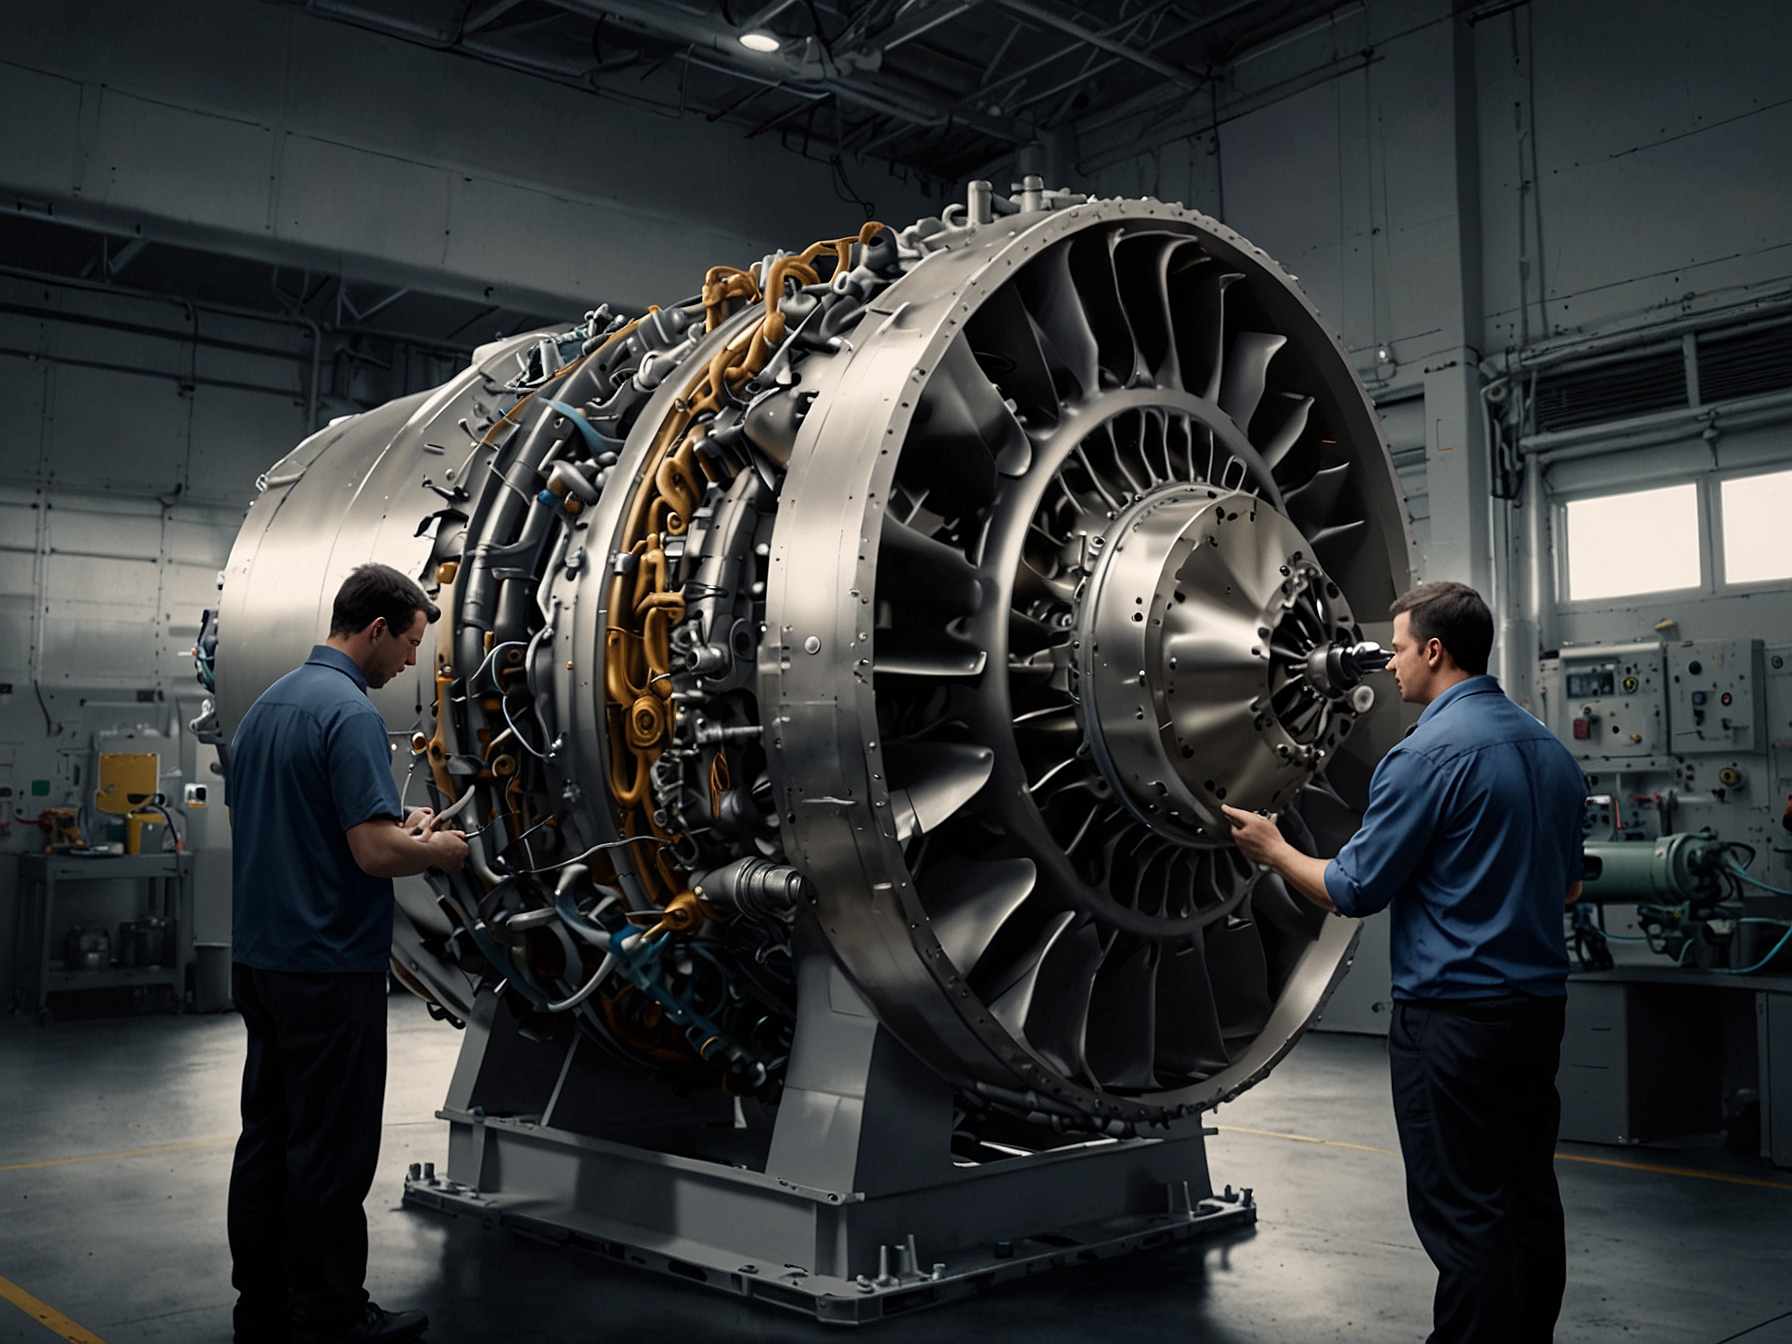 An aircraft engine being examined by engineers, illustrating GE Aerospace's market leadership and technological innovation in providing cutting-edge solutions to the aerospace industry.